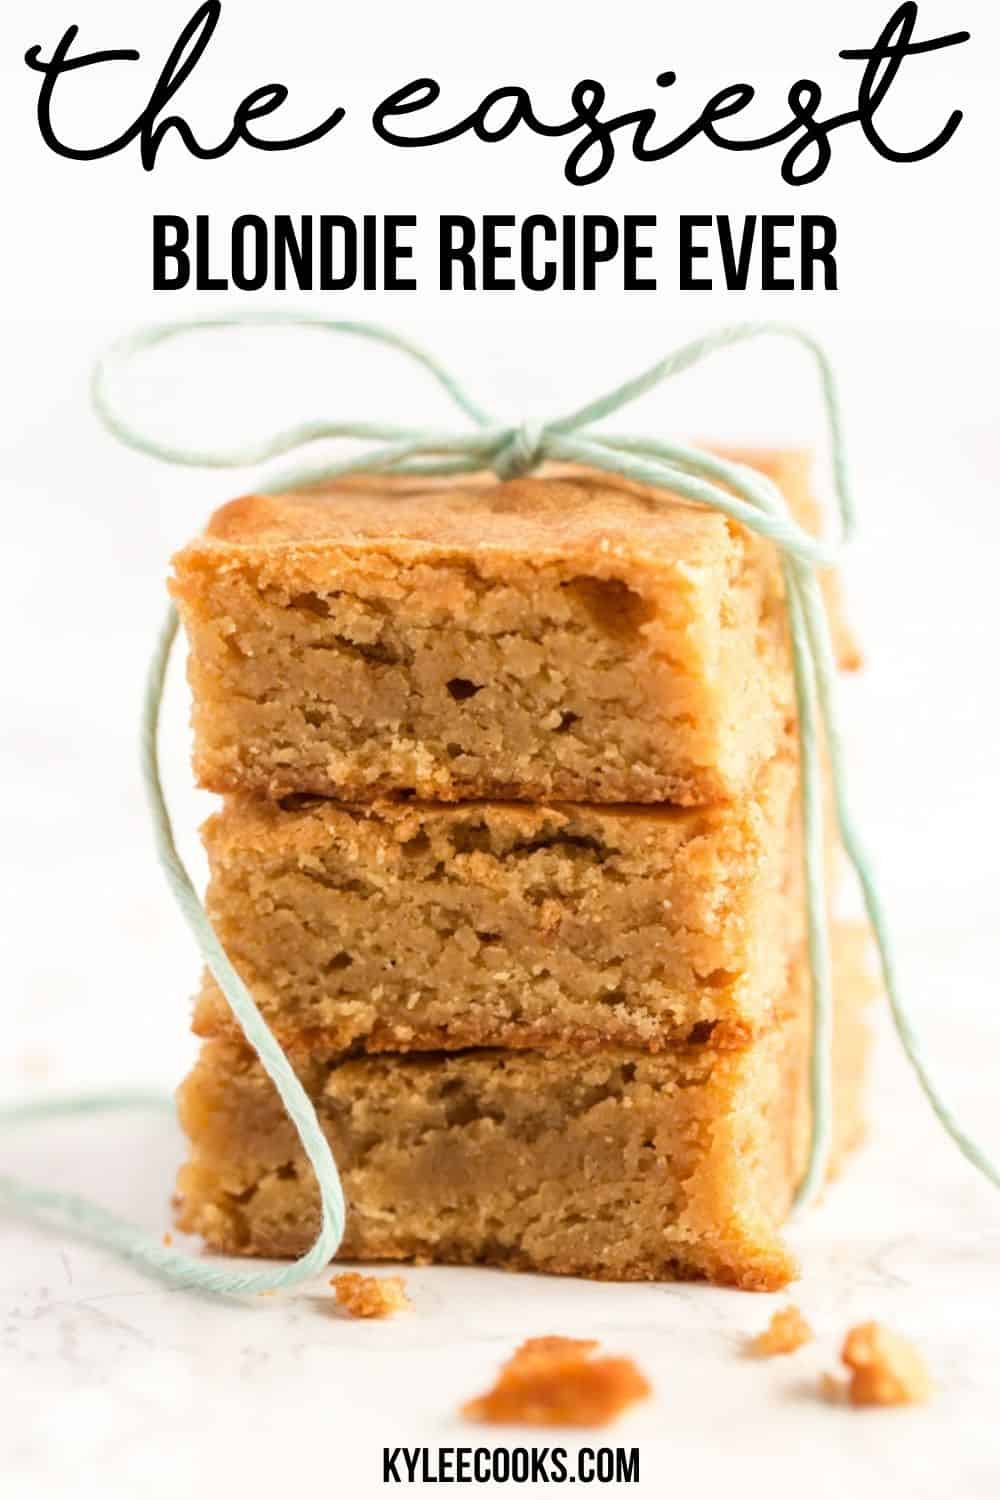 blondies in a stack with the recipe title in text overlaid